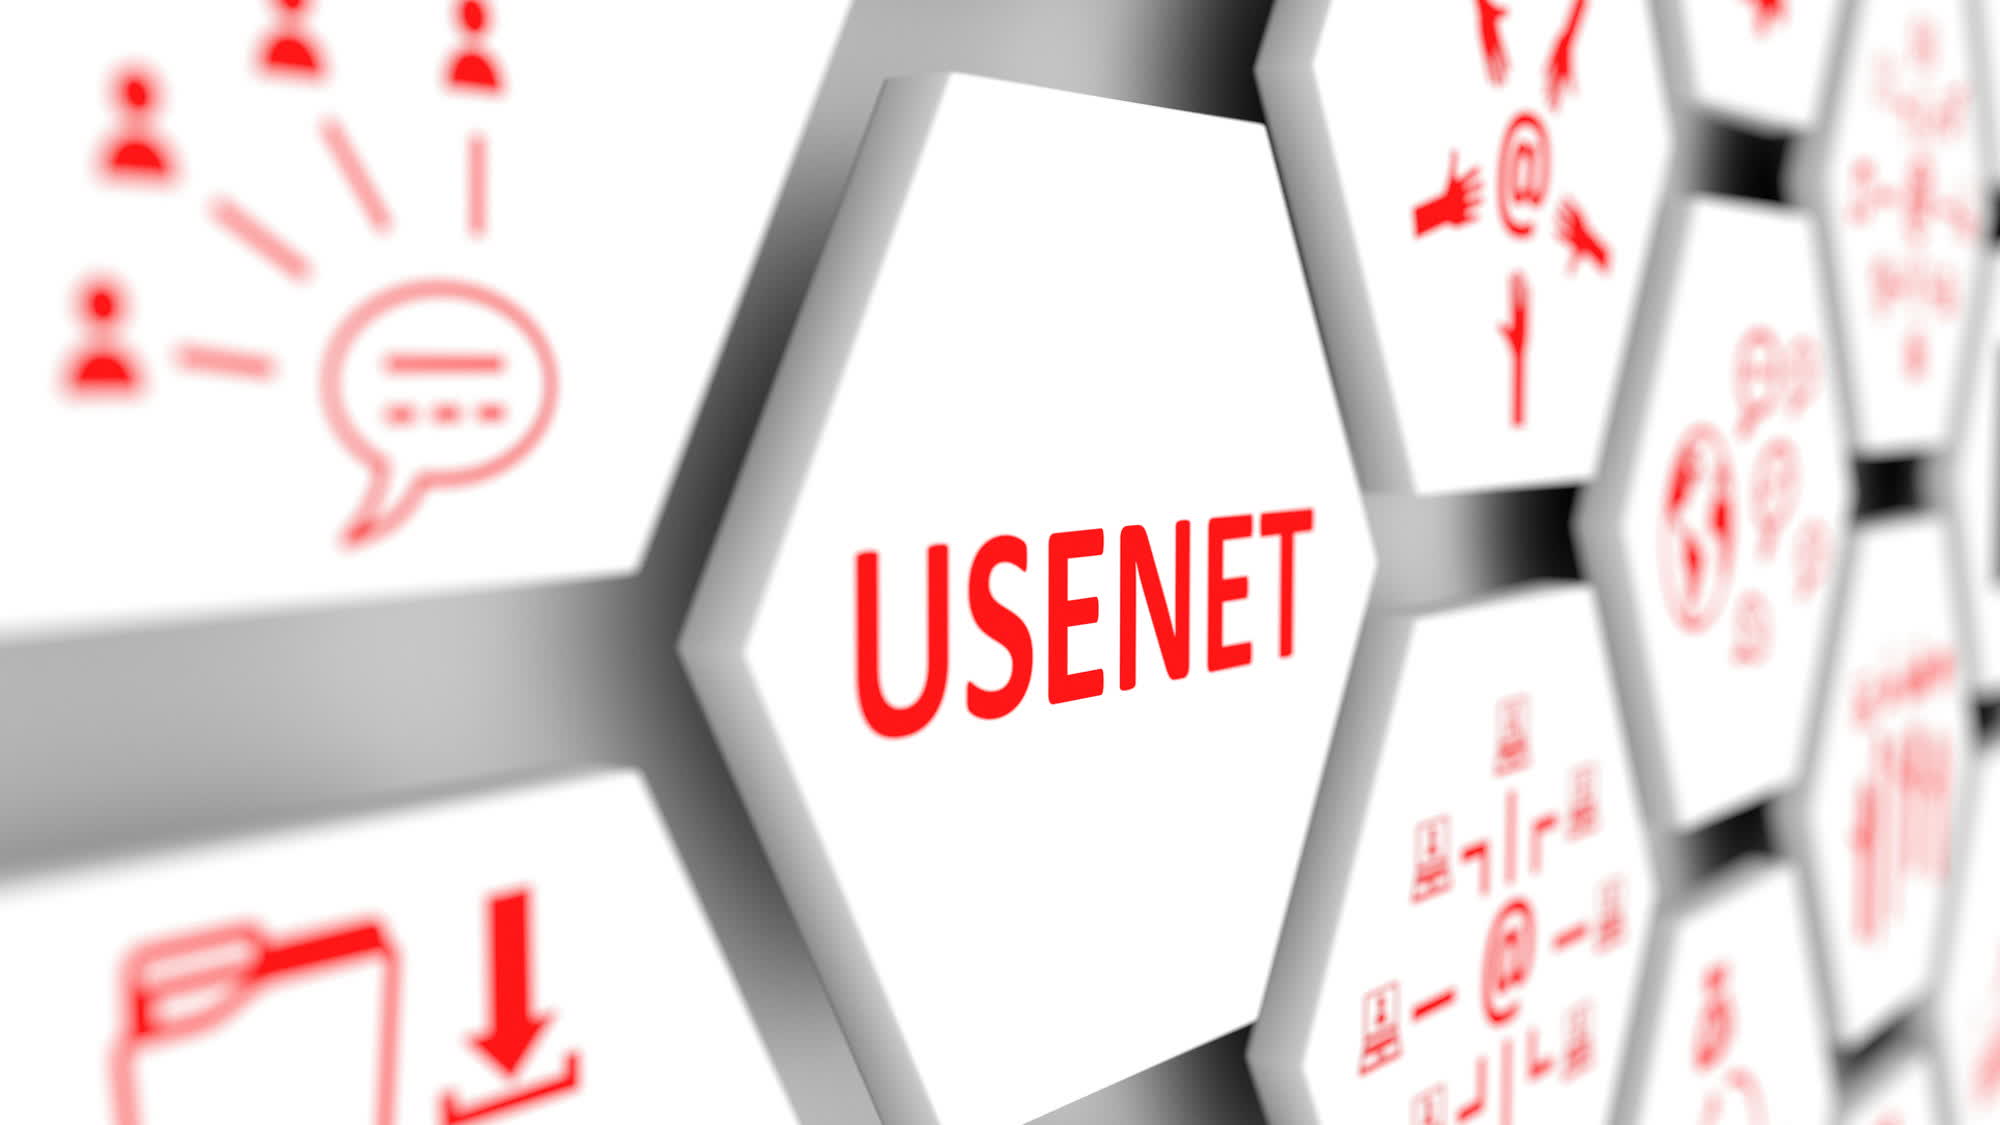 Usenet is still alive, and the Big-8 Board is managing things again